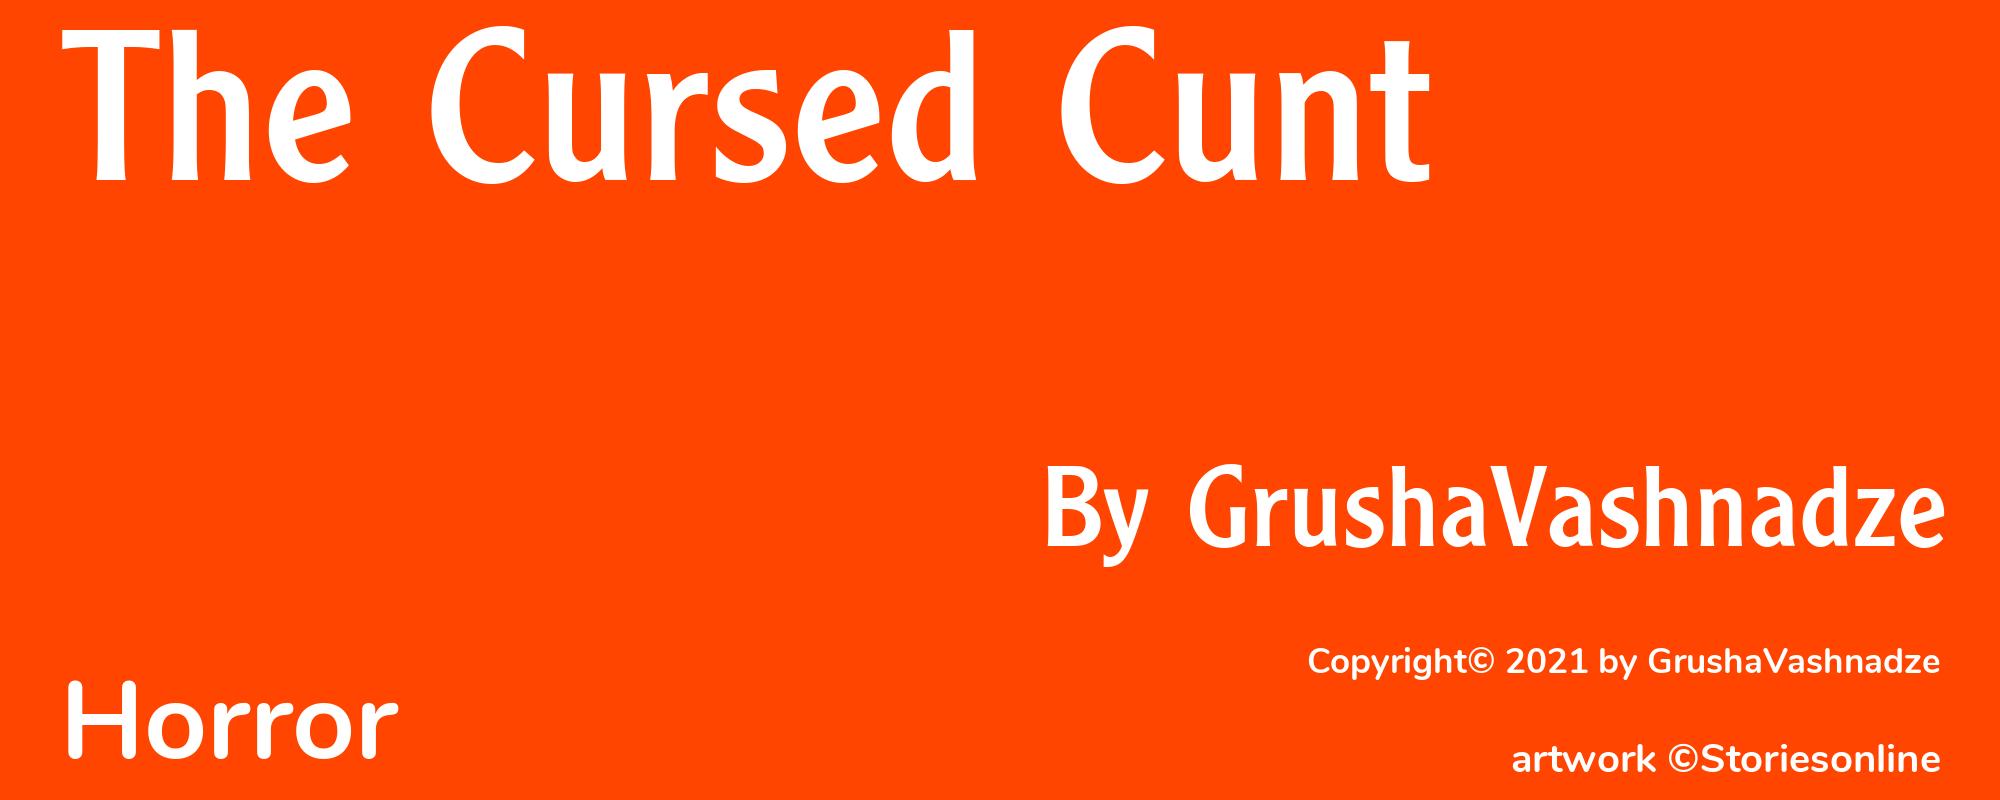 The Cursed Cunt - Cover